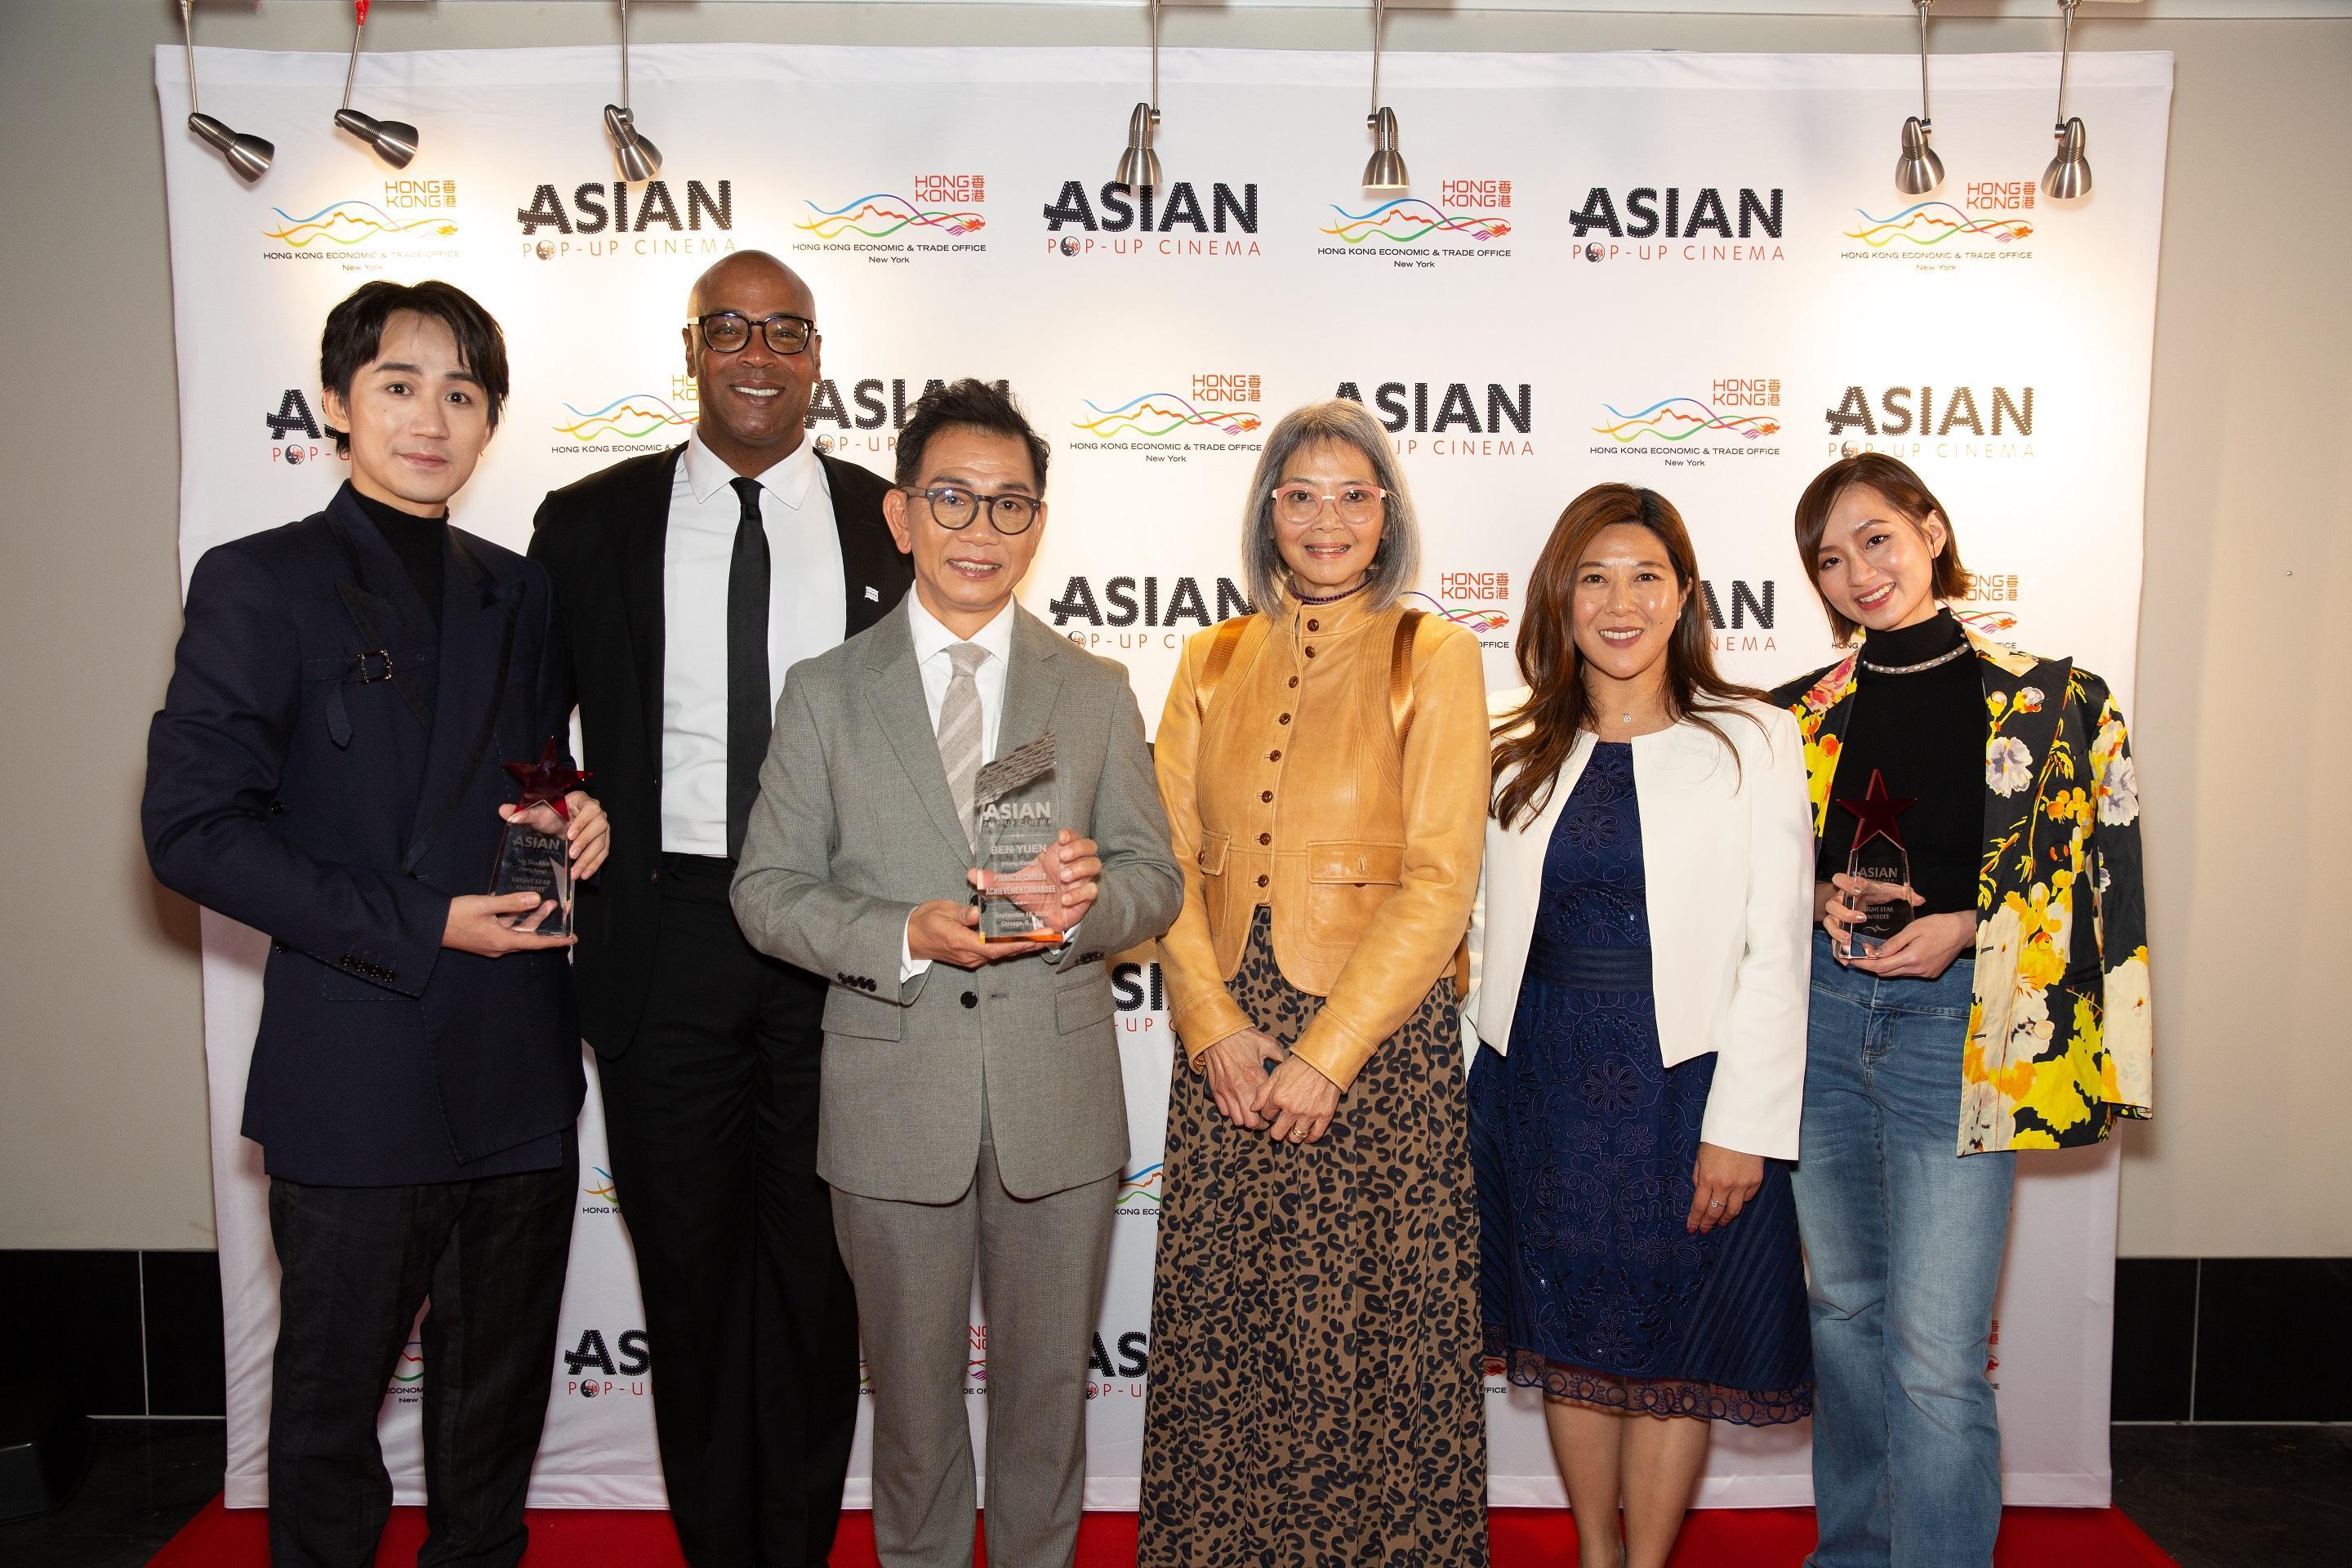 Several Hong Kong film talents across different generations were recognised for their outstanding achievement and contribution to the industry at the awards presentation ceremony of the Asian Pop-Up Cinema (APUC) Season 17 in Chicago on September 16 (Chicago time). Pictured at the awards presentation ceremony are (from left) actor Ng Siu-hin with his Bright Star Award; the Chair of Board of Directors of Choose Chicago, Mr Glenn Eden; actor Ben Yuen with his Pinnacle Career Achievement Award; the Executive Director of the APUC, Ms Sophia Wong Boccio; the Director of the Hong Kong Economic and Trade Office in New York, Ms Maisie Ho, and actress Rachel Leung with her Bright Star Award.